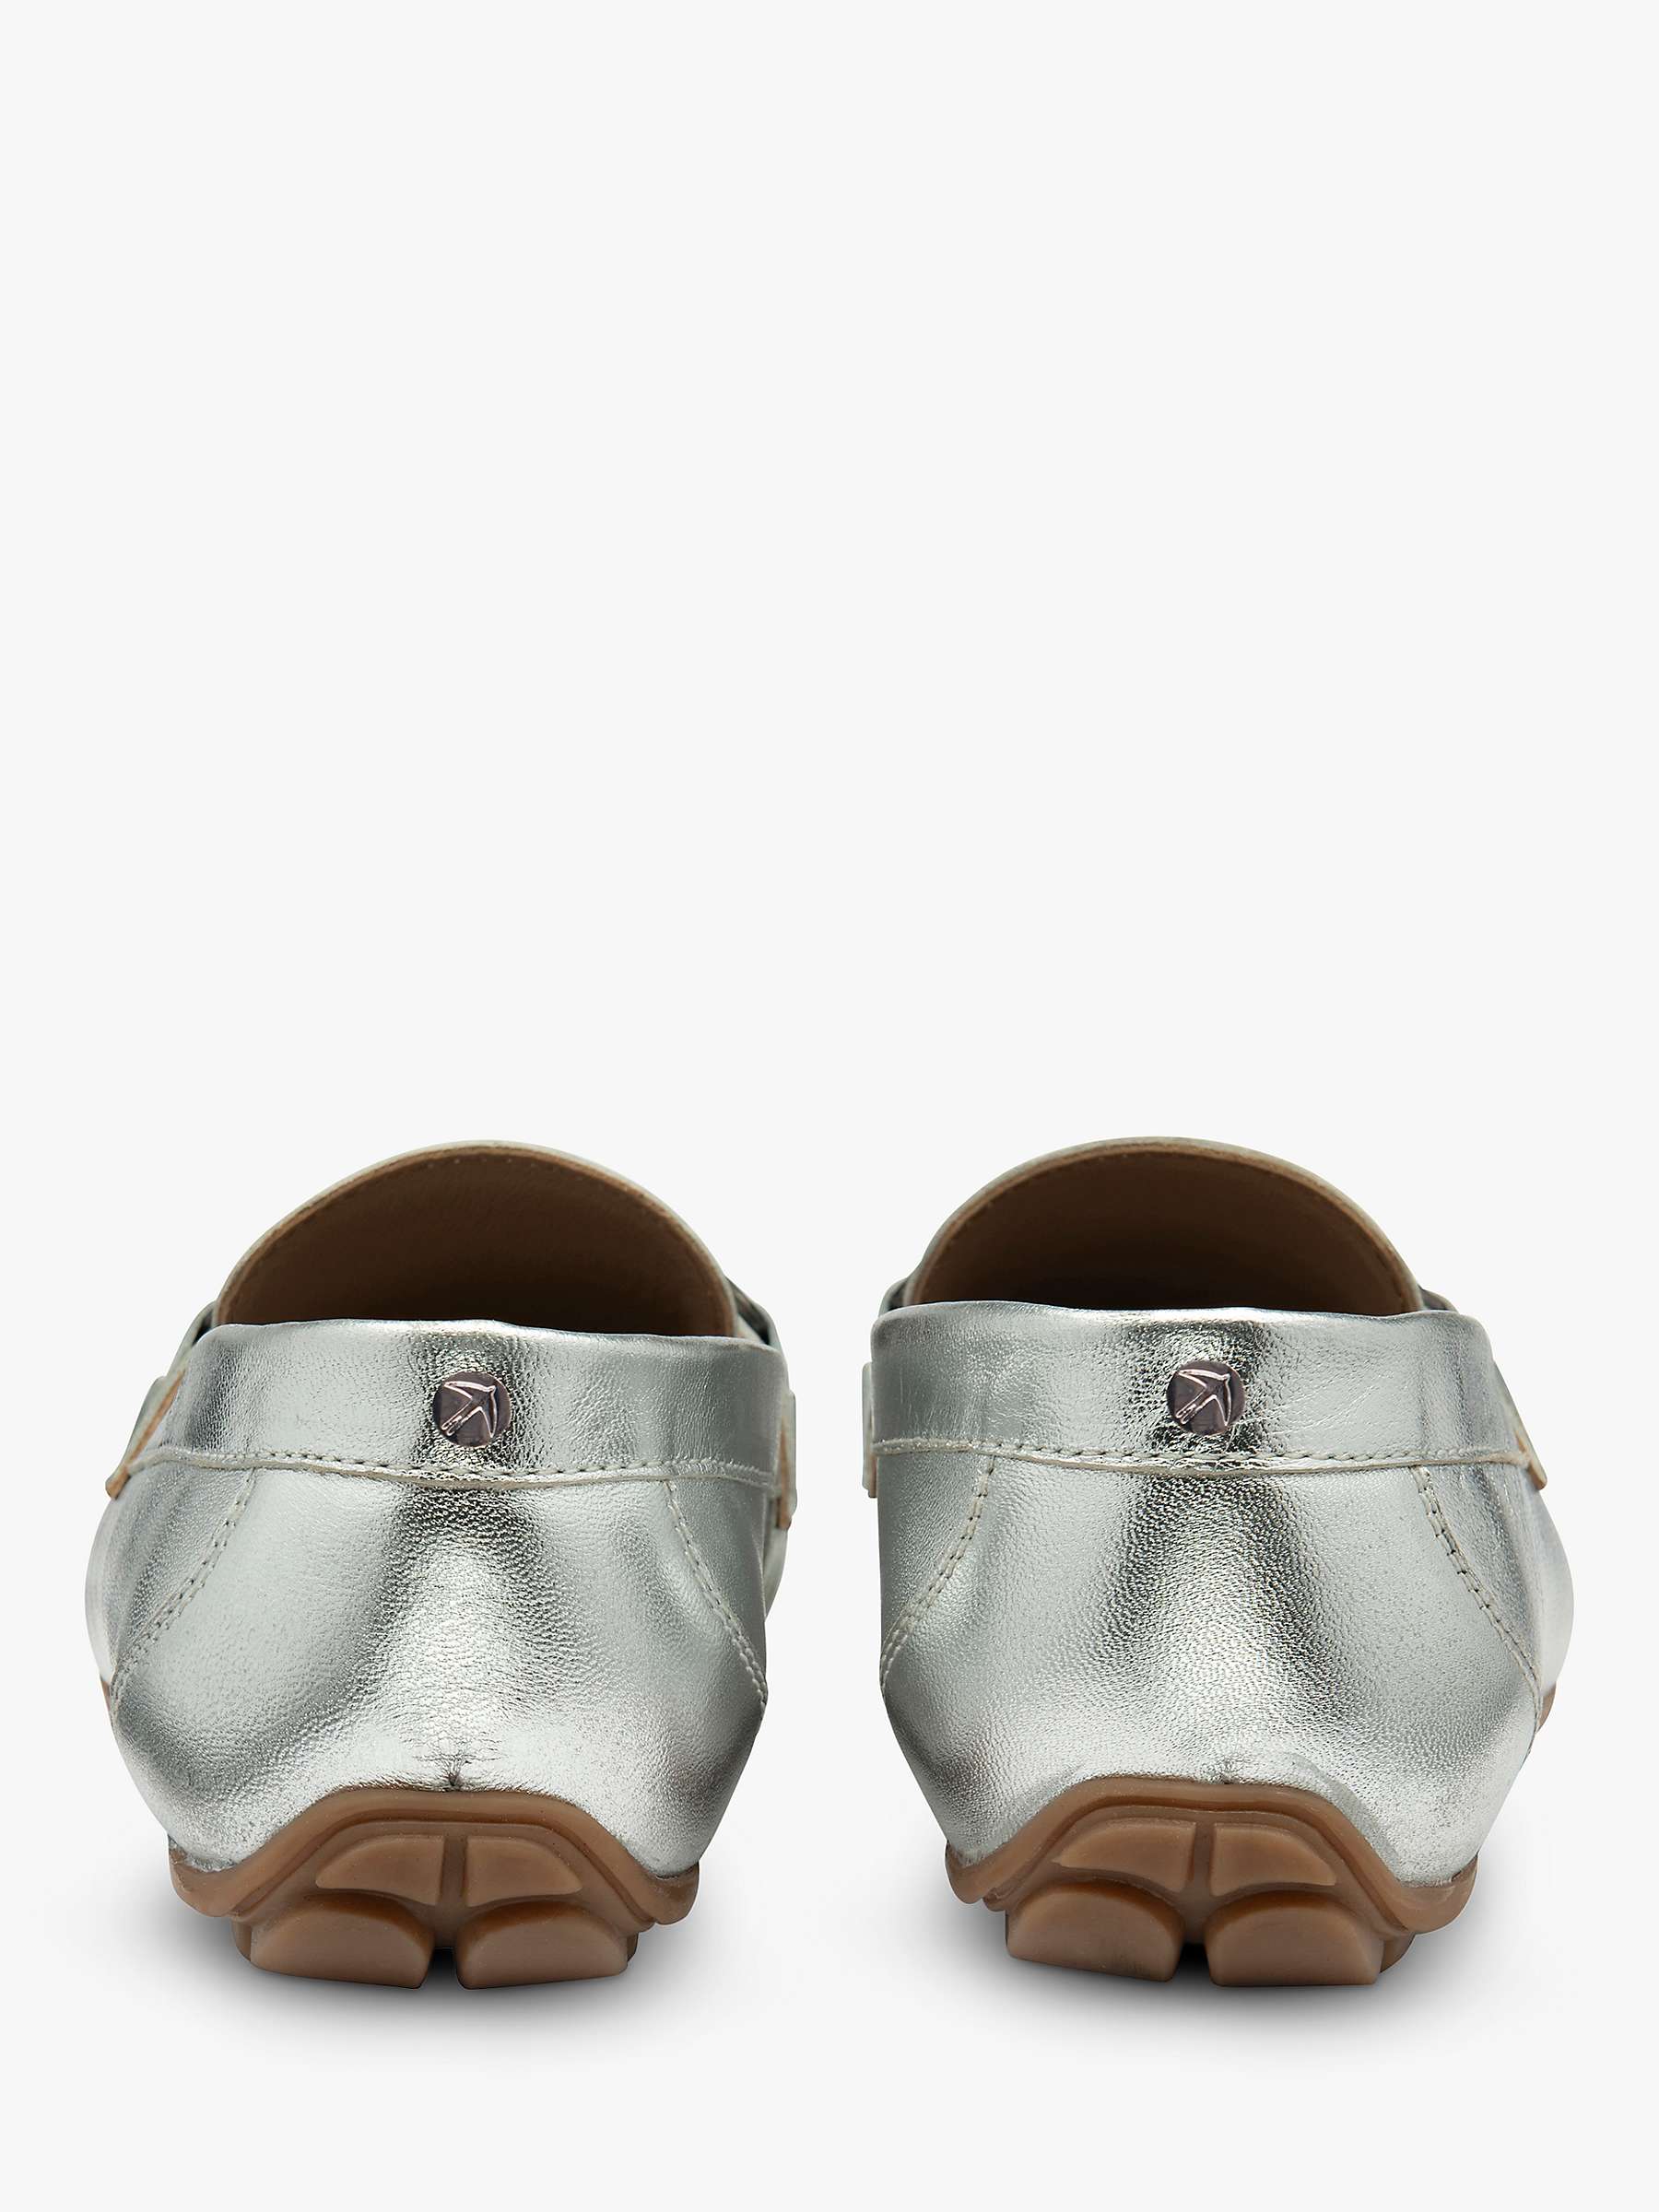 Buy Ravel Dutton Leather Loafers, Silver Online at johnlewis.com